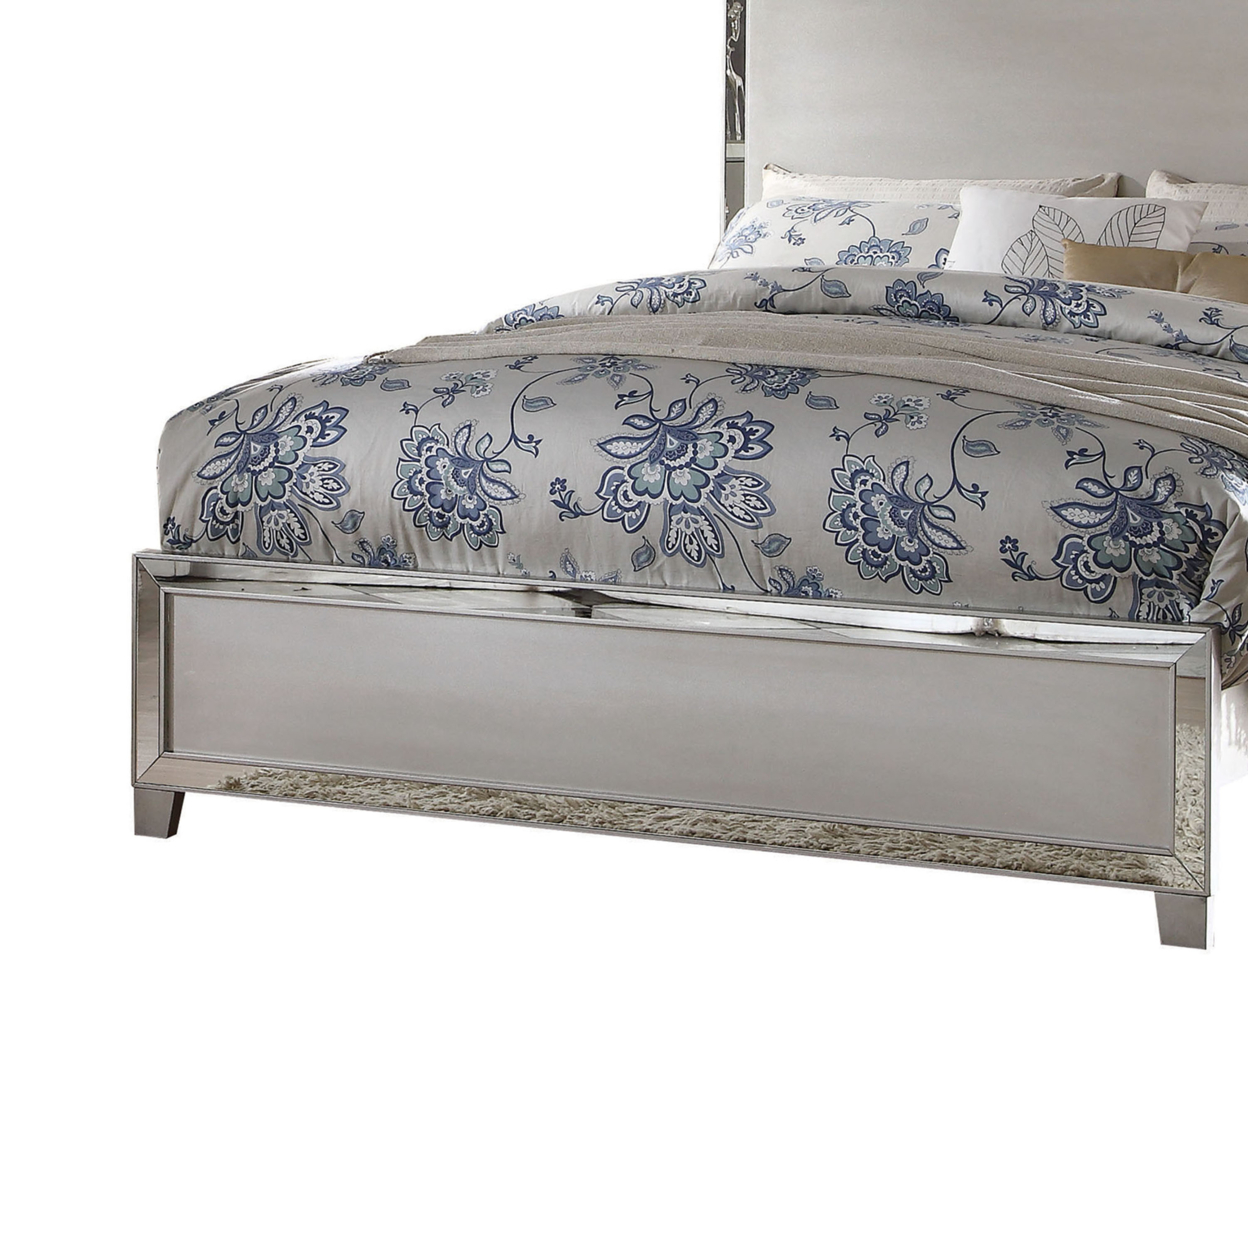 Panel Design Wooden Eastern King Bed With Mirror Trim Accents, Silver- Saltoro Sherpi